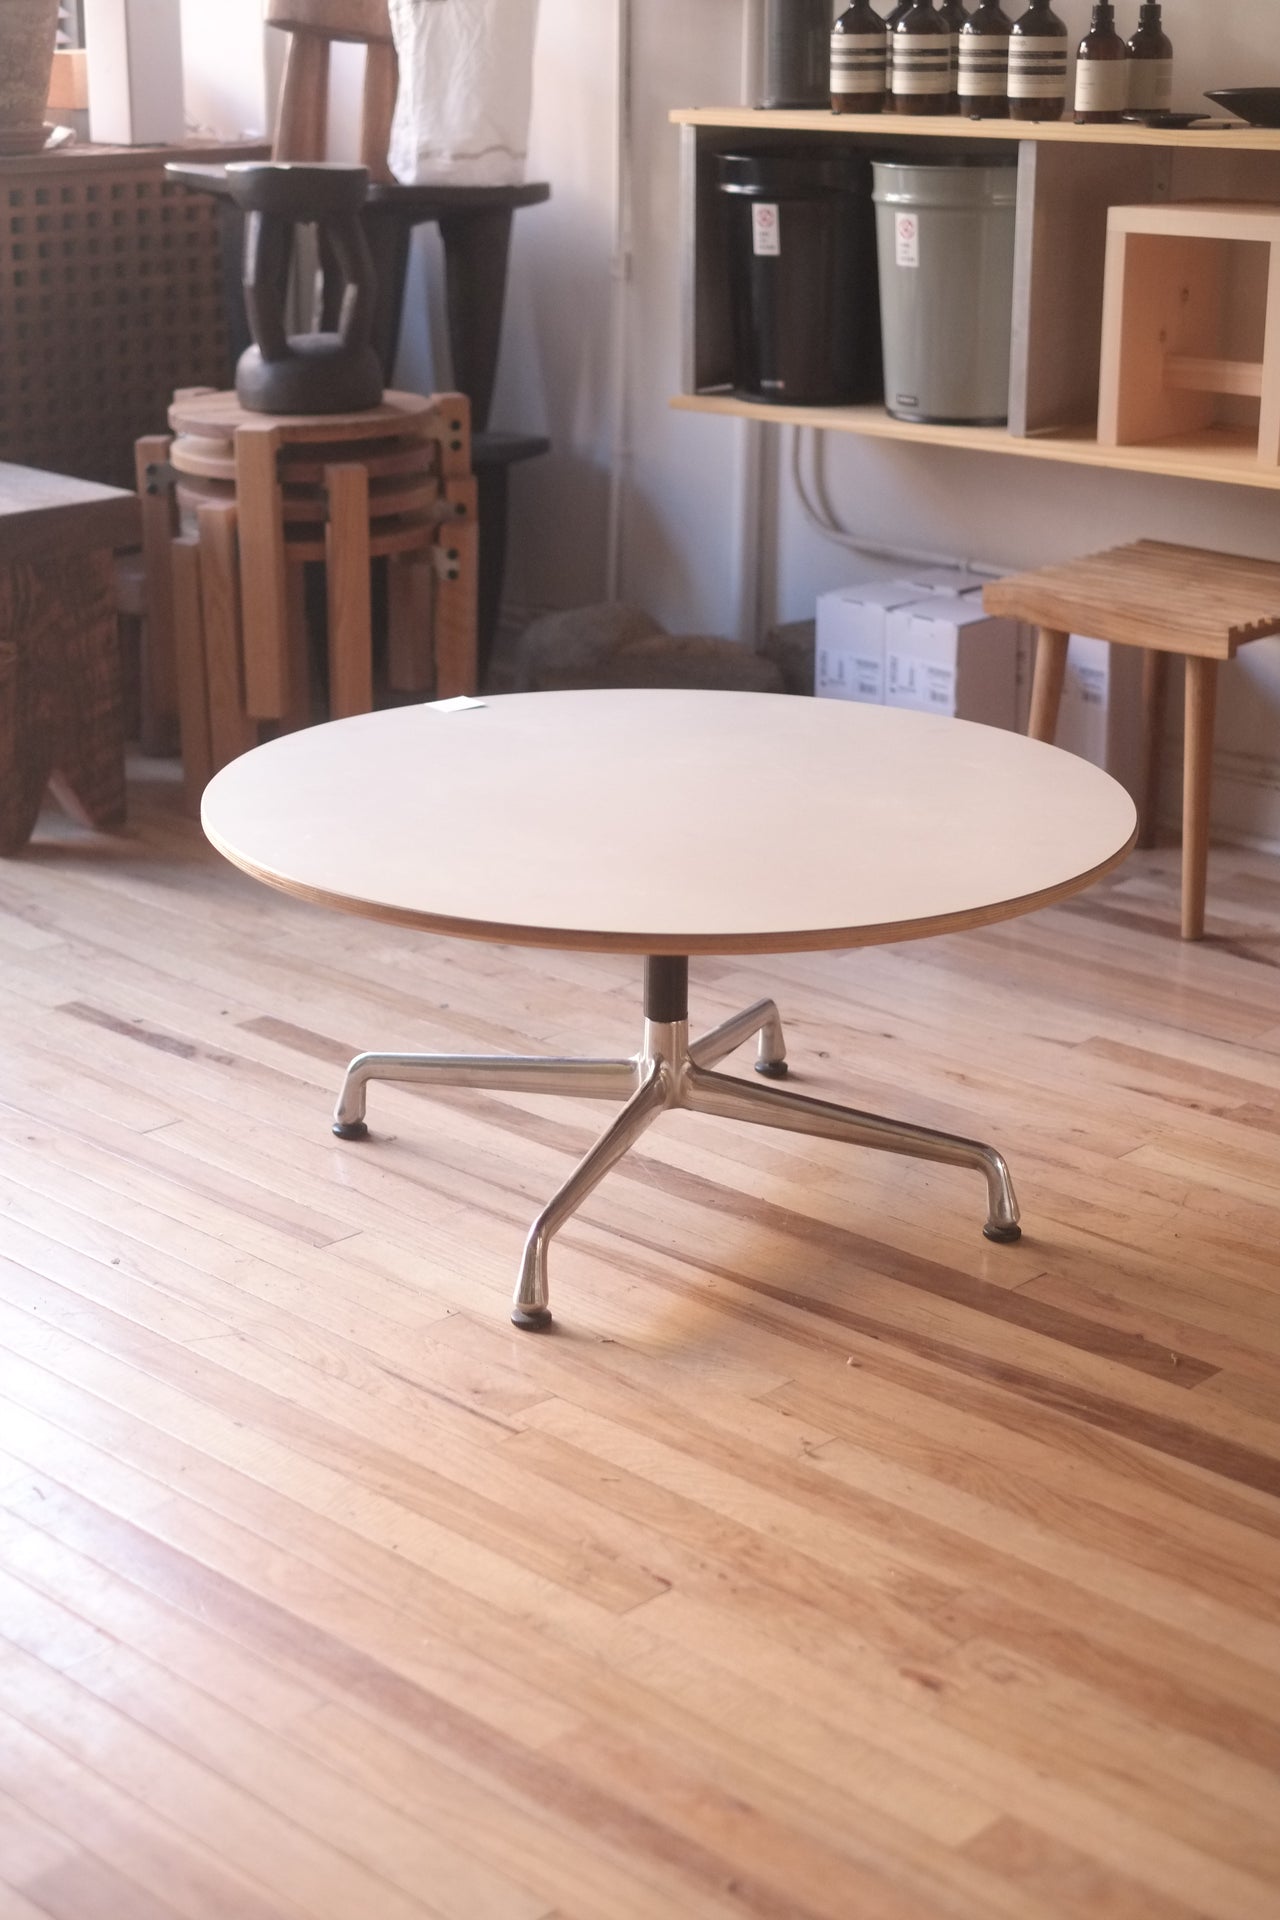 Eames ALG coffee table by Herman Miller (Egg shell)